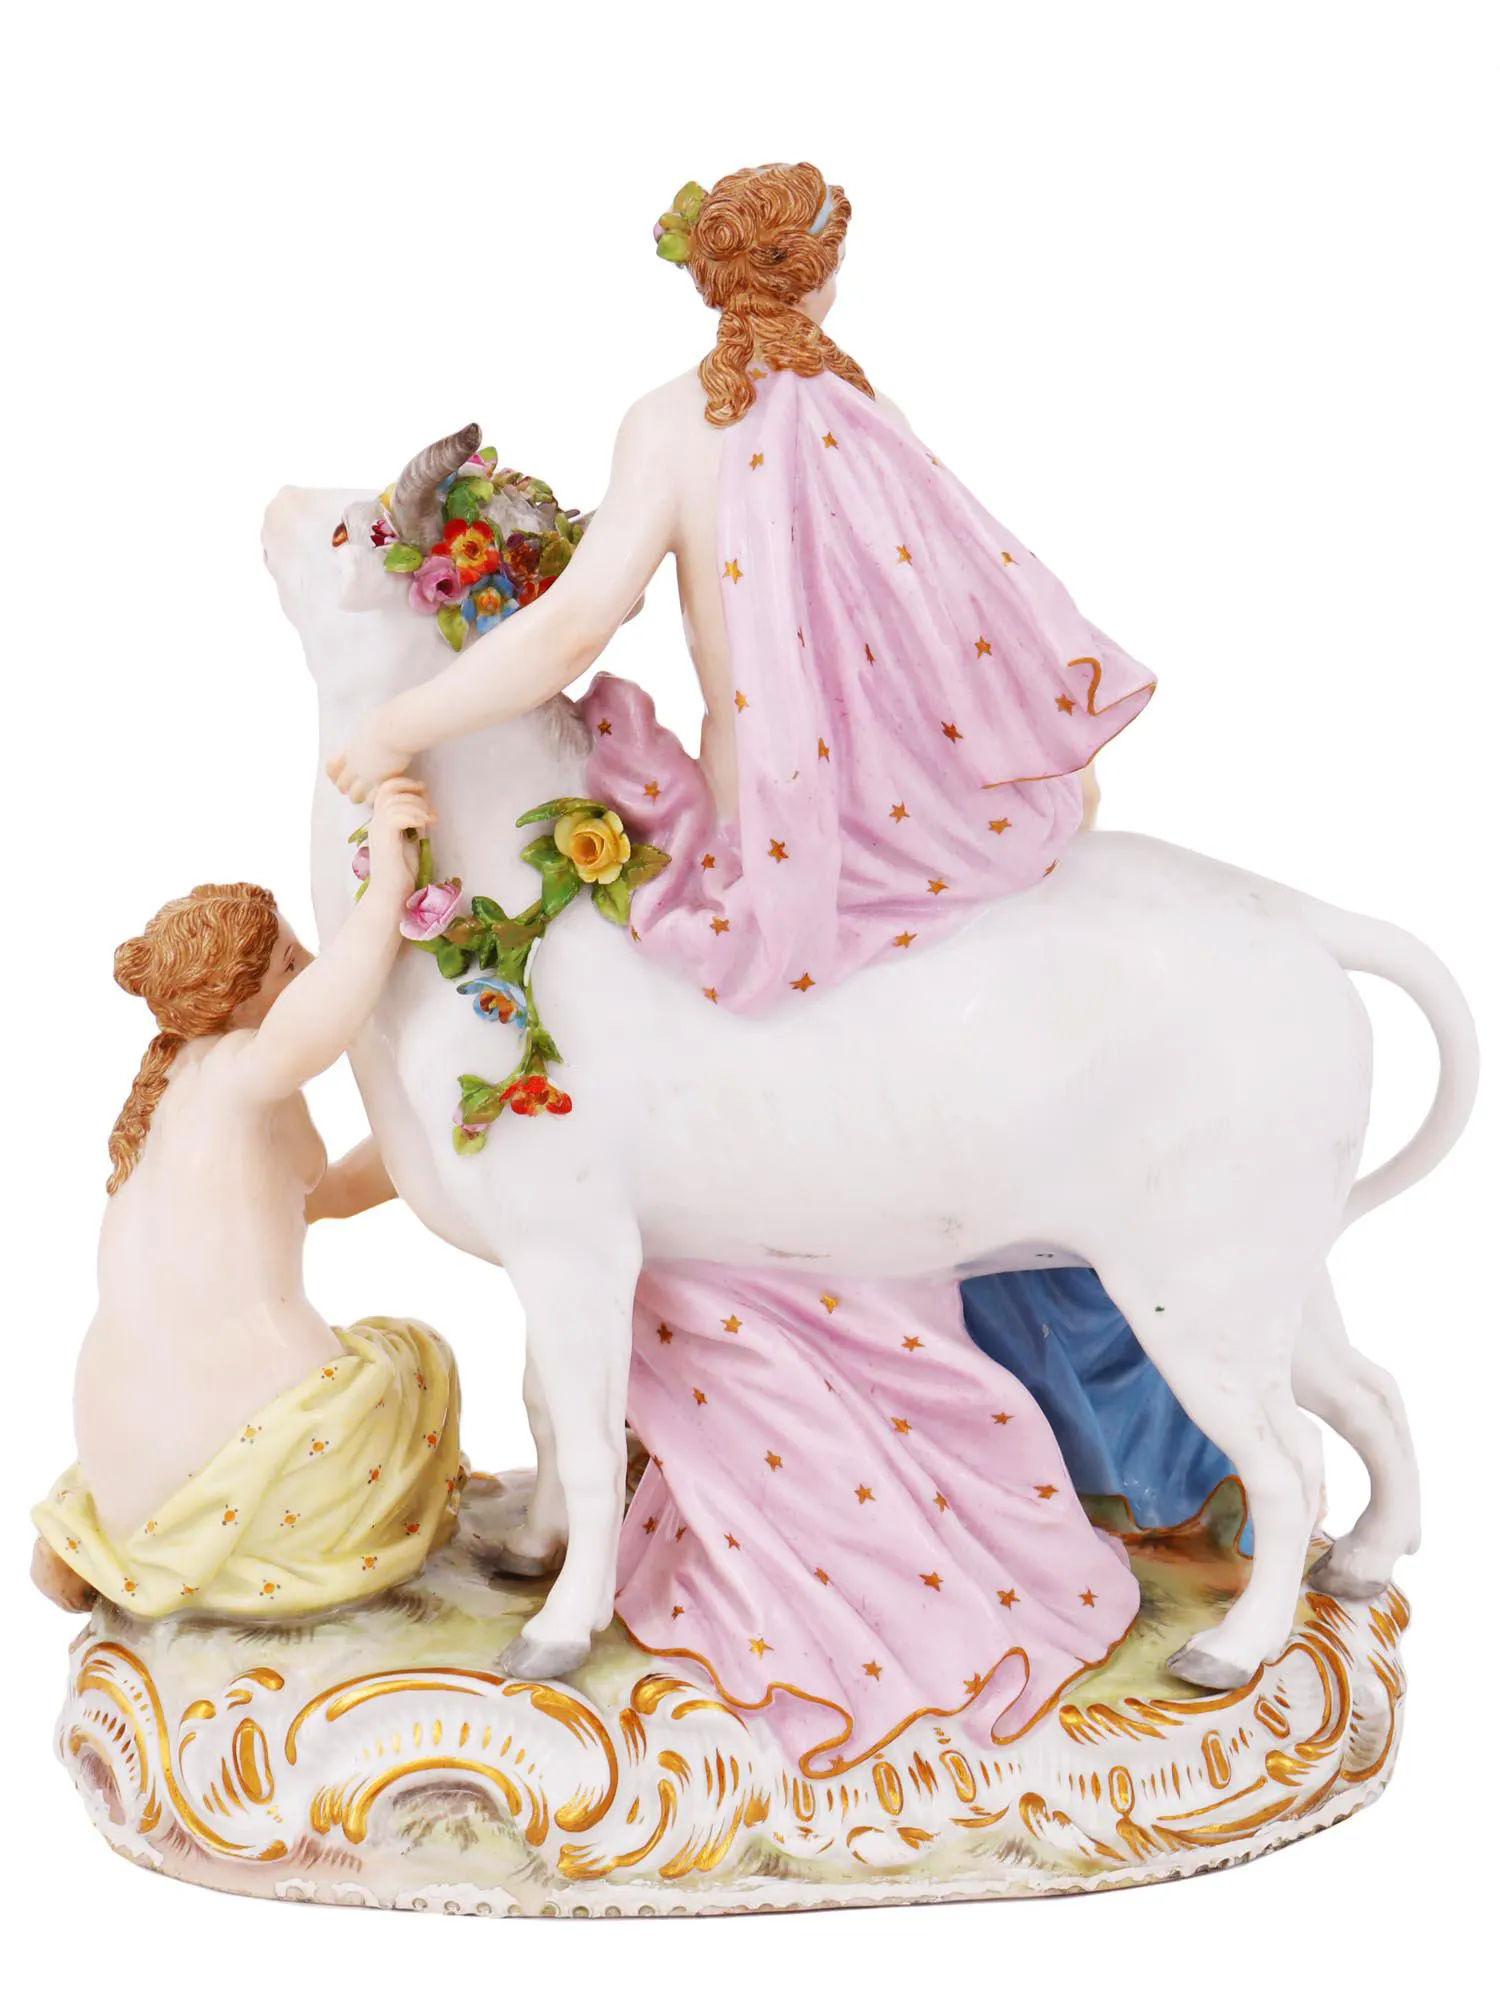 Our porcelain figurine from Meissen depicts Europa riding Jupiter, disquised as a bull, depicting the Rape of Europa from Ovid's Metamorphosis. 

It tells of the abduction of Europa by Jupiter, disguised as a bull. Charmed by the bull’s good